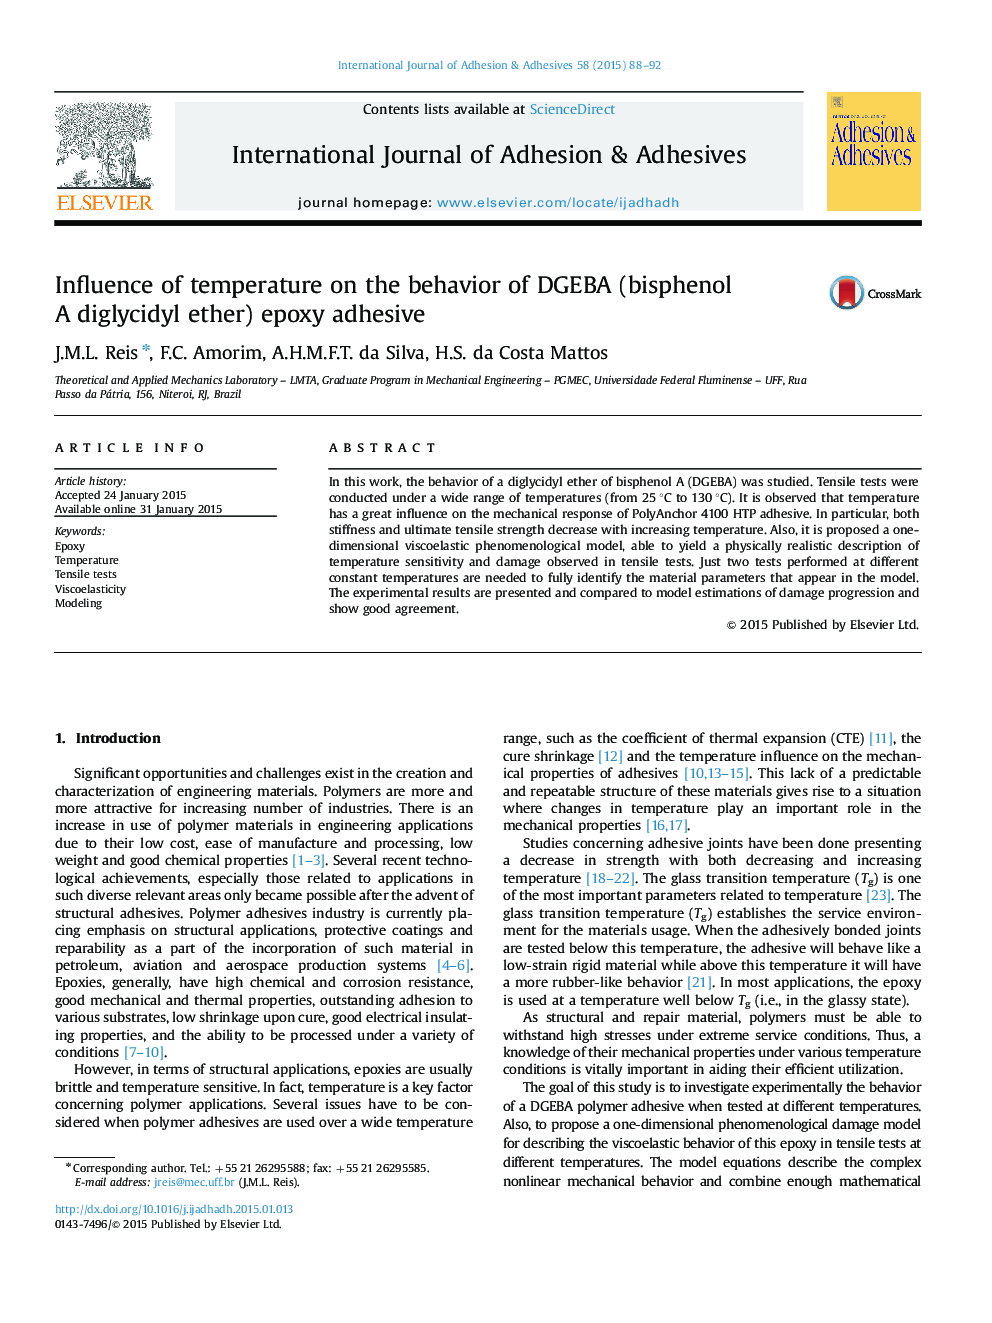 Influence of temperature on the behavior of DGEBA (bisphenol A diglycidyl ether) epoxy adhesive